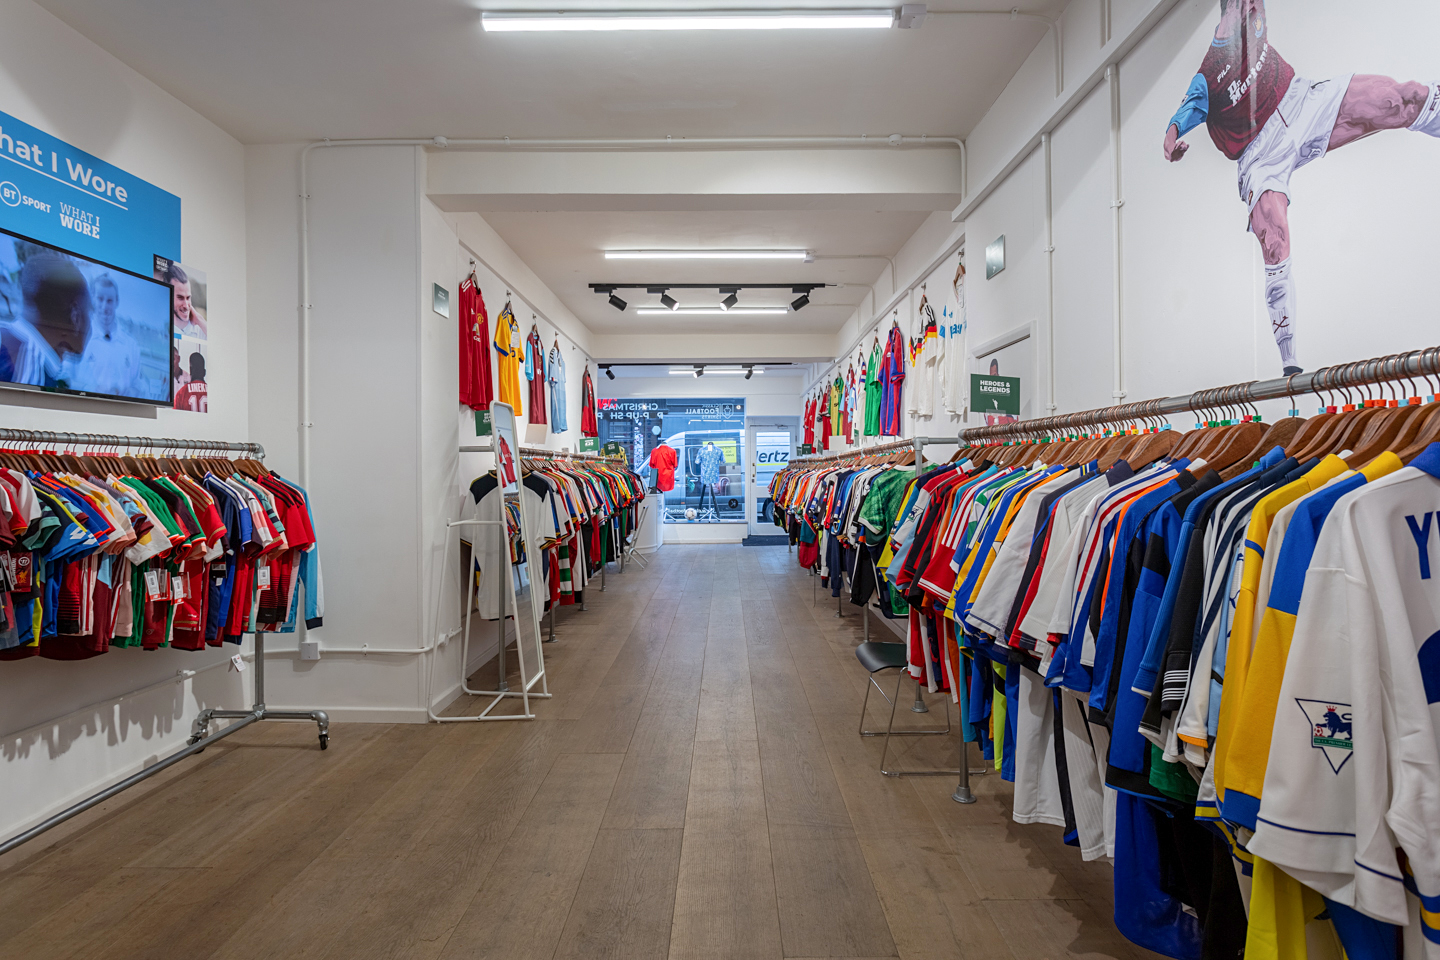 Classic Football Shirts creates unique and immersive pop-up